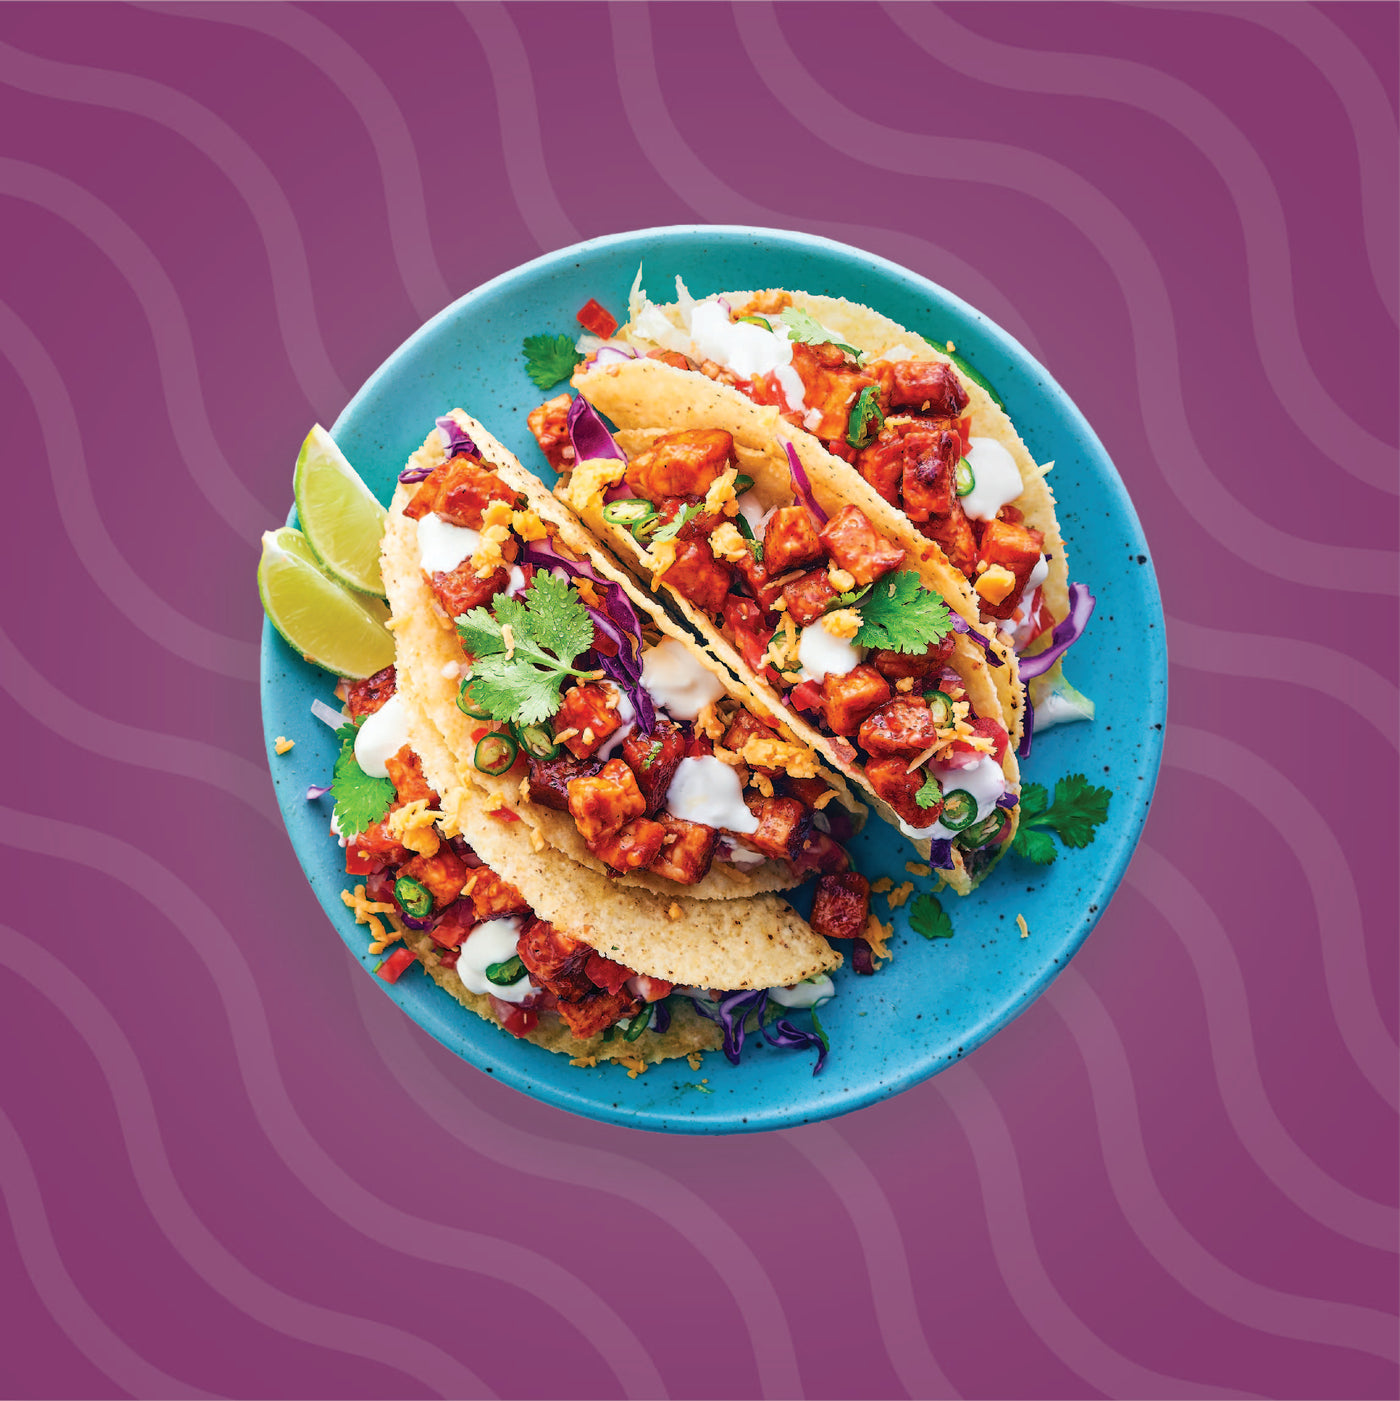 Buy Tempeh Tacos online at best Price | Hello Tempayy